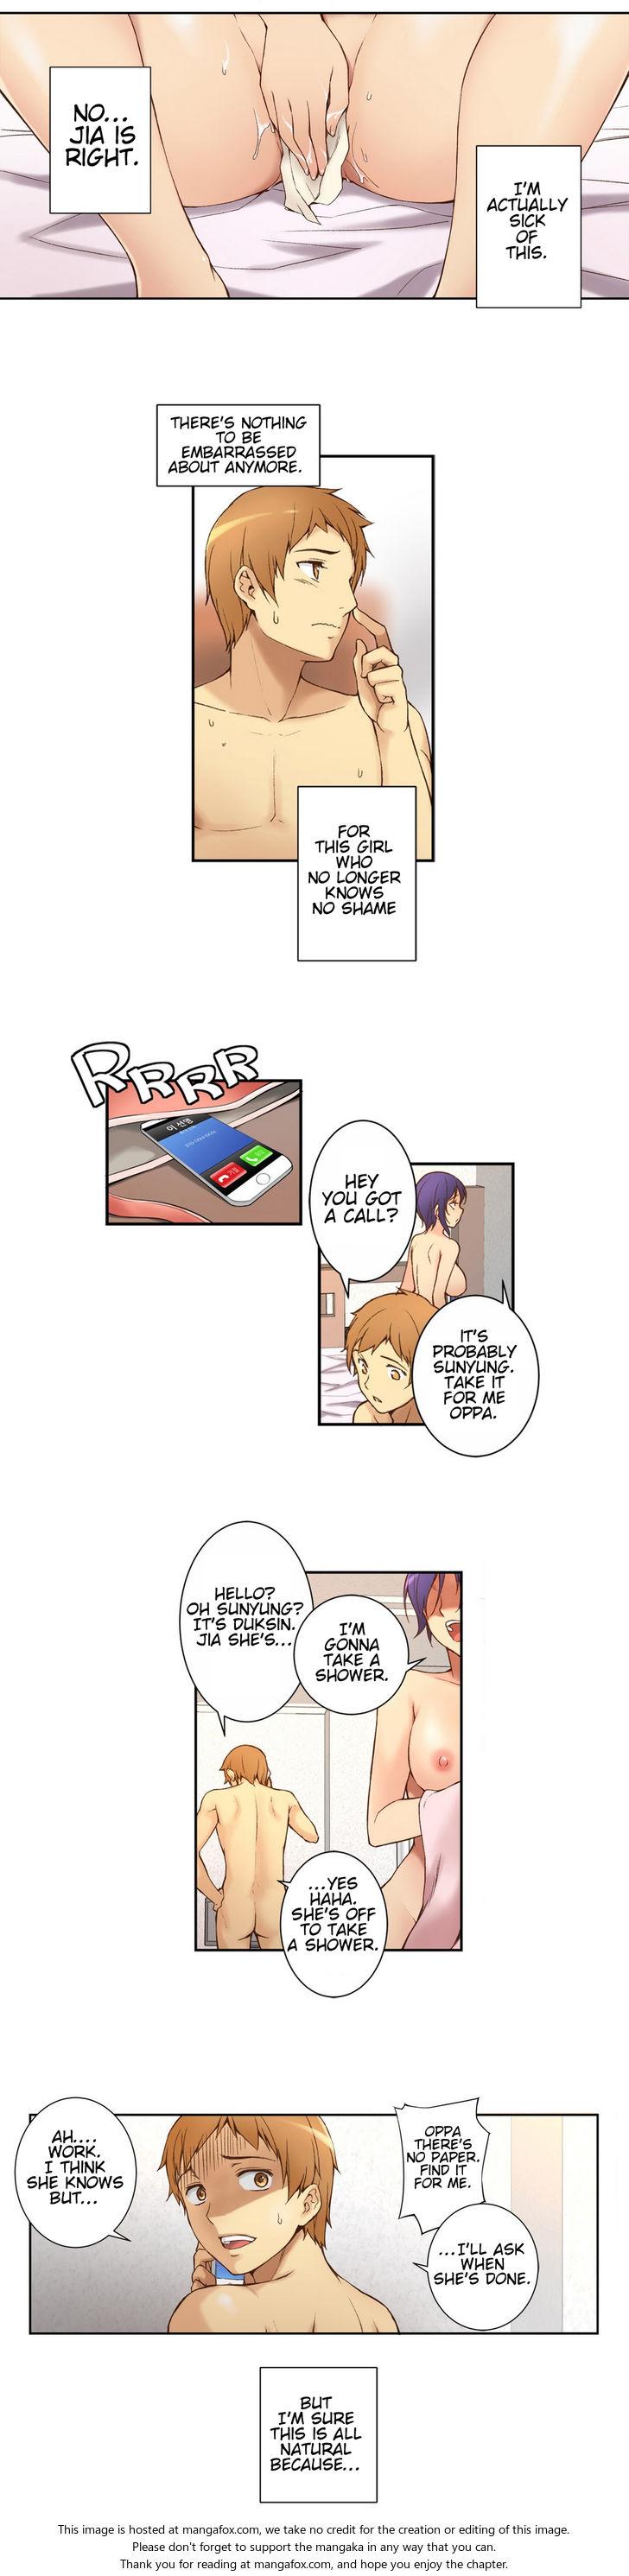 Oral Sex [Donggul Gom] She is Young (English) Part 1/2 Fingers - Page 8